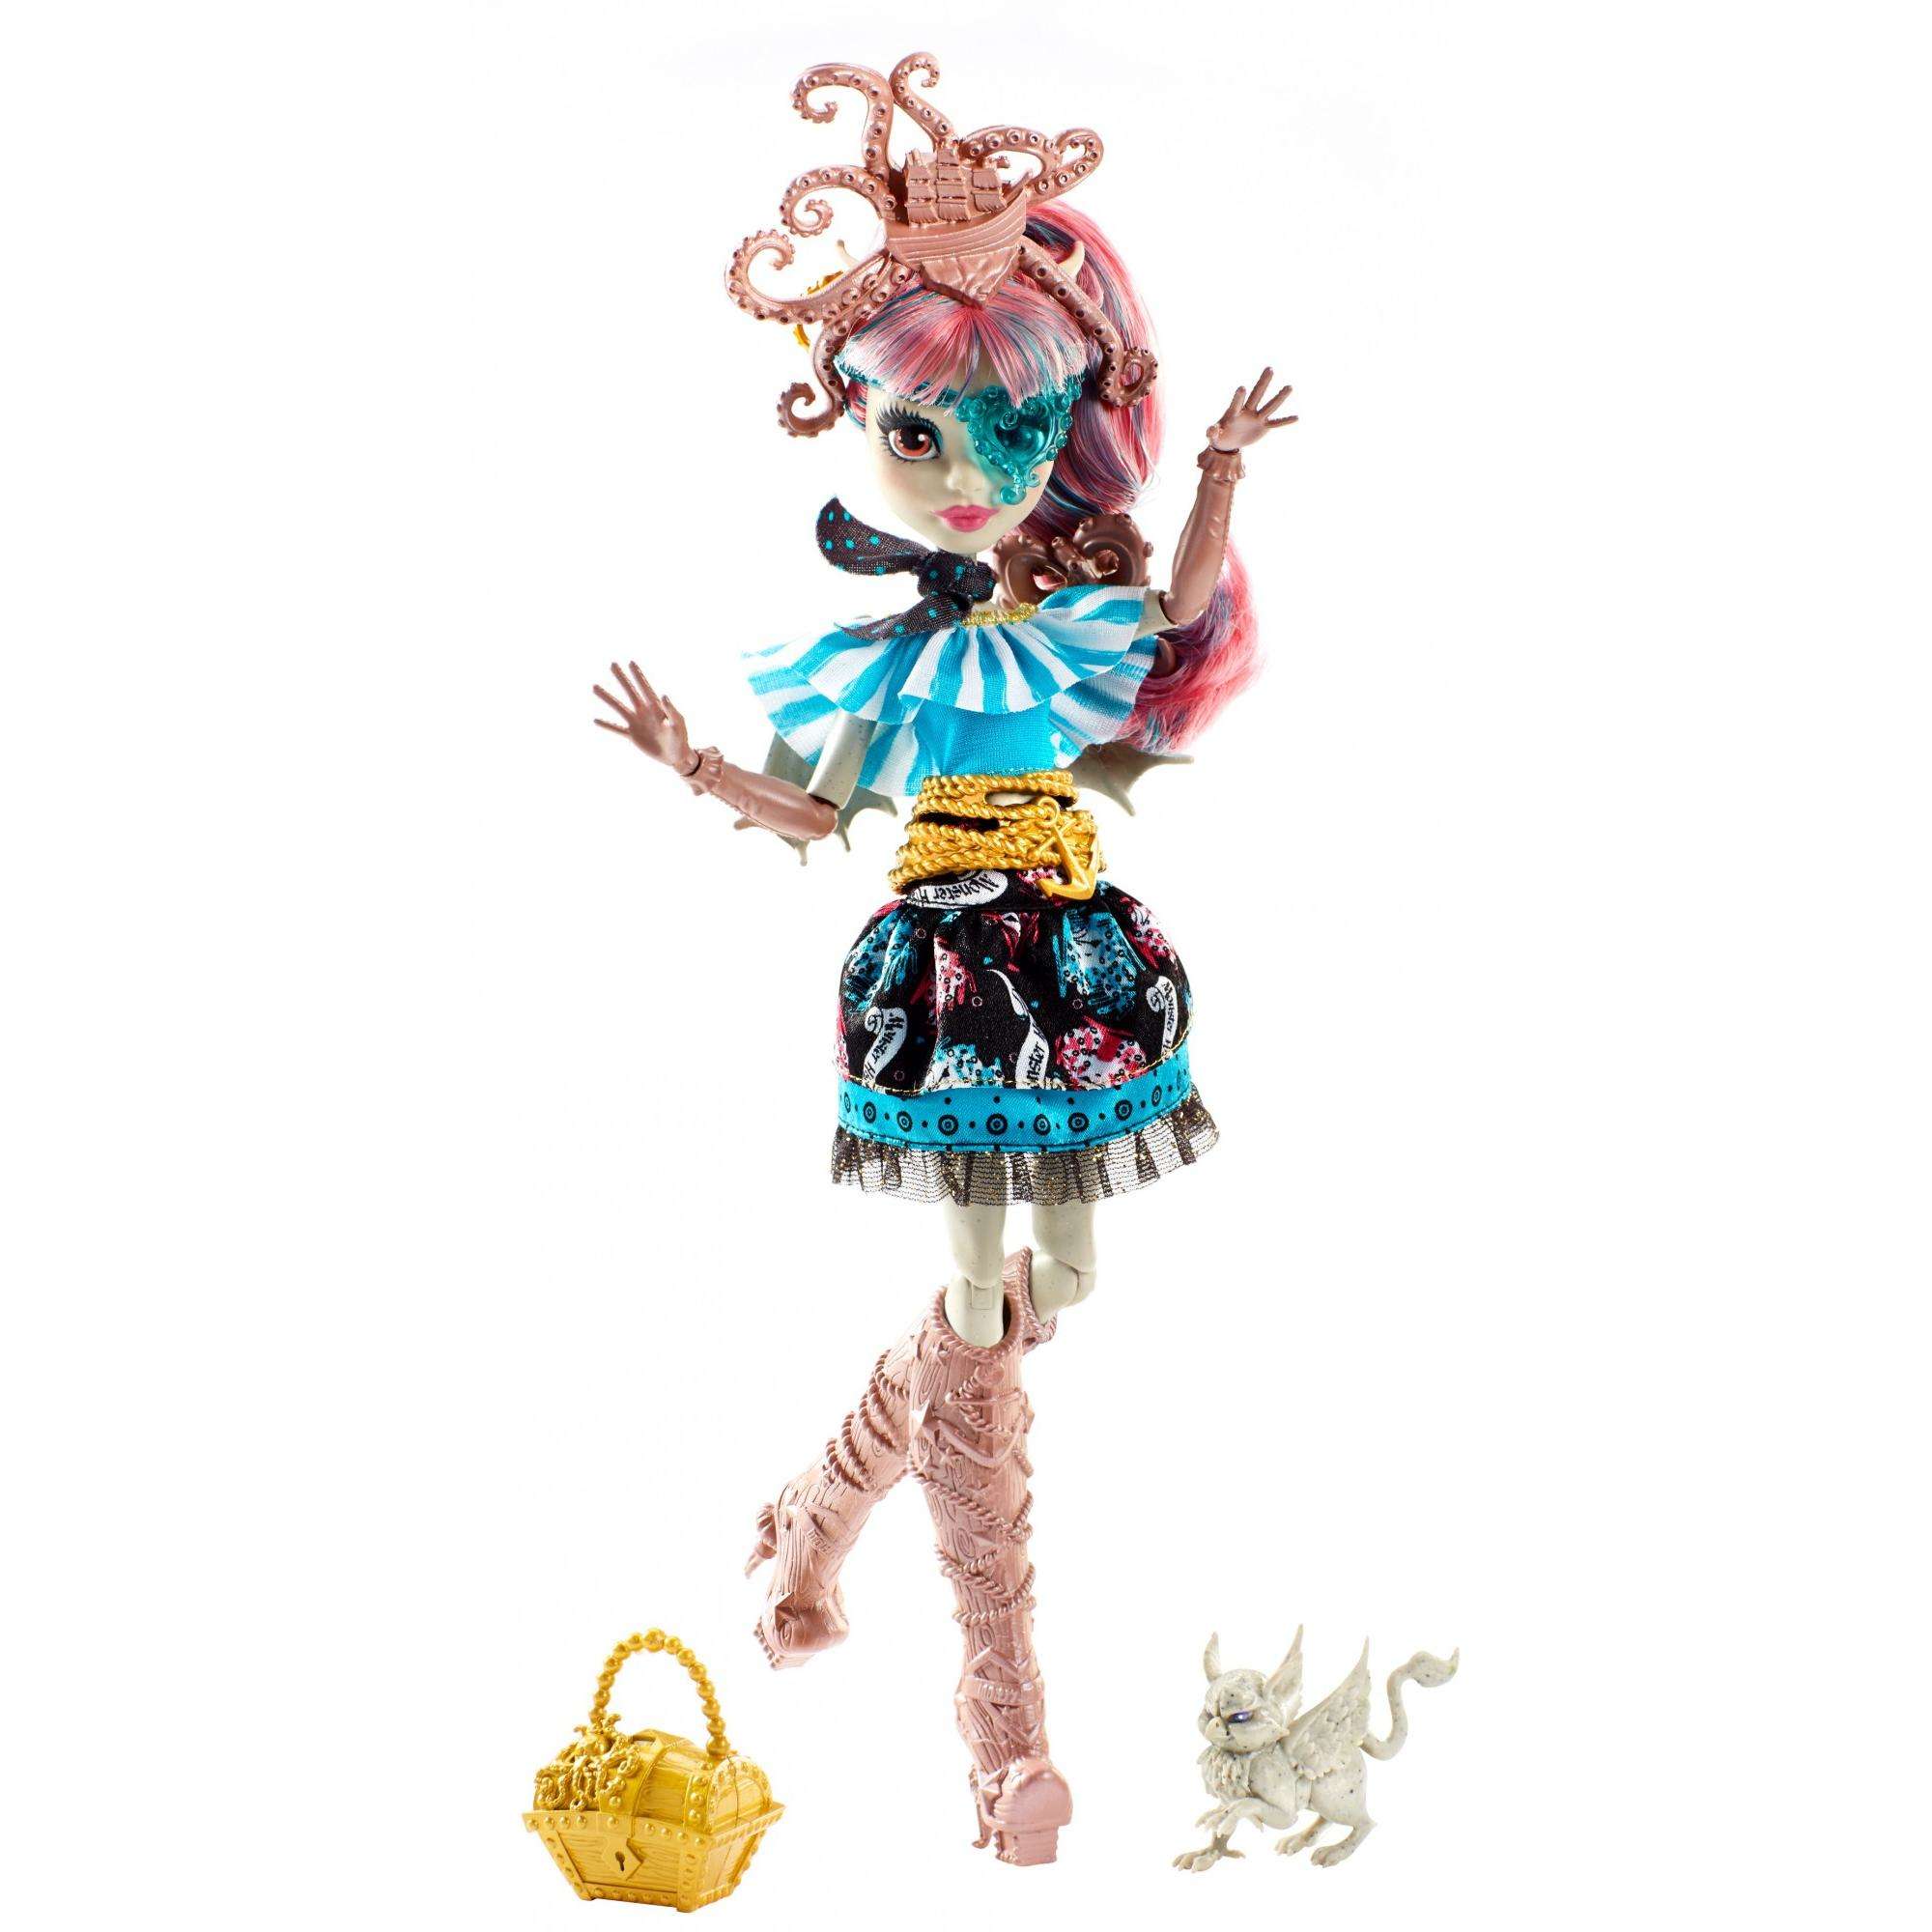 Monster High Shriekwrecked Nautical Ghouls Rochelle Goyle Doll - image 3 of 9